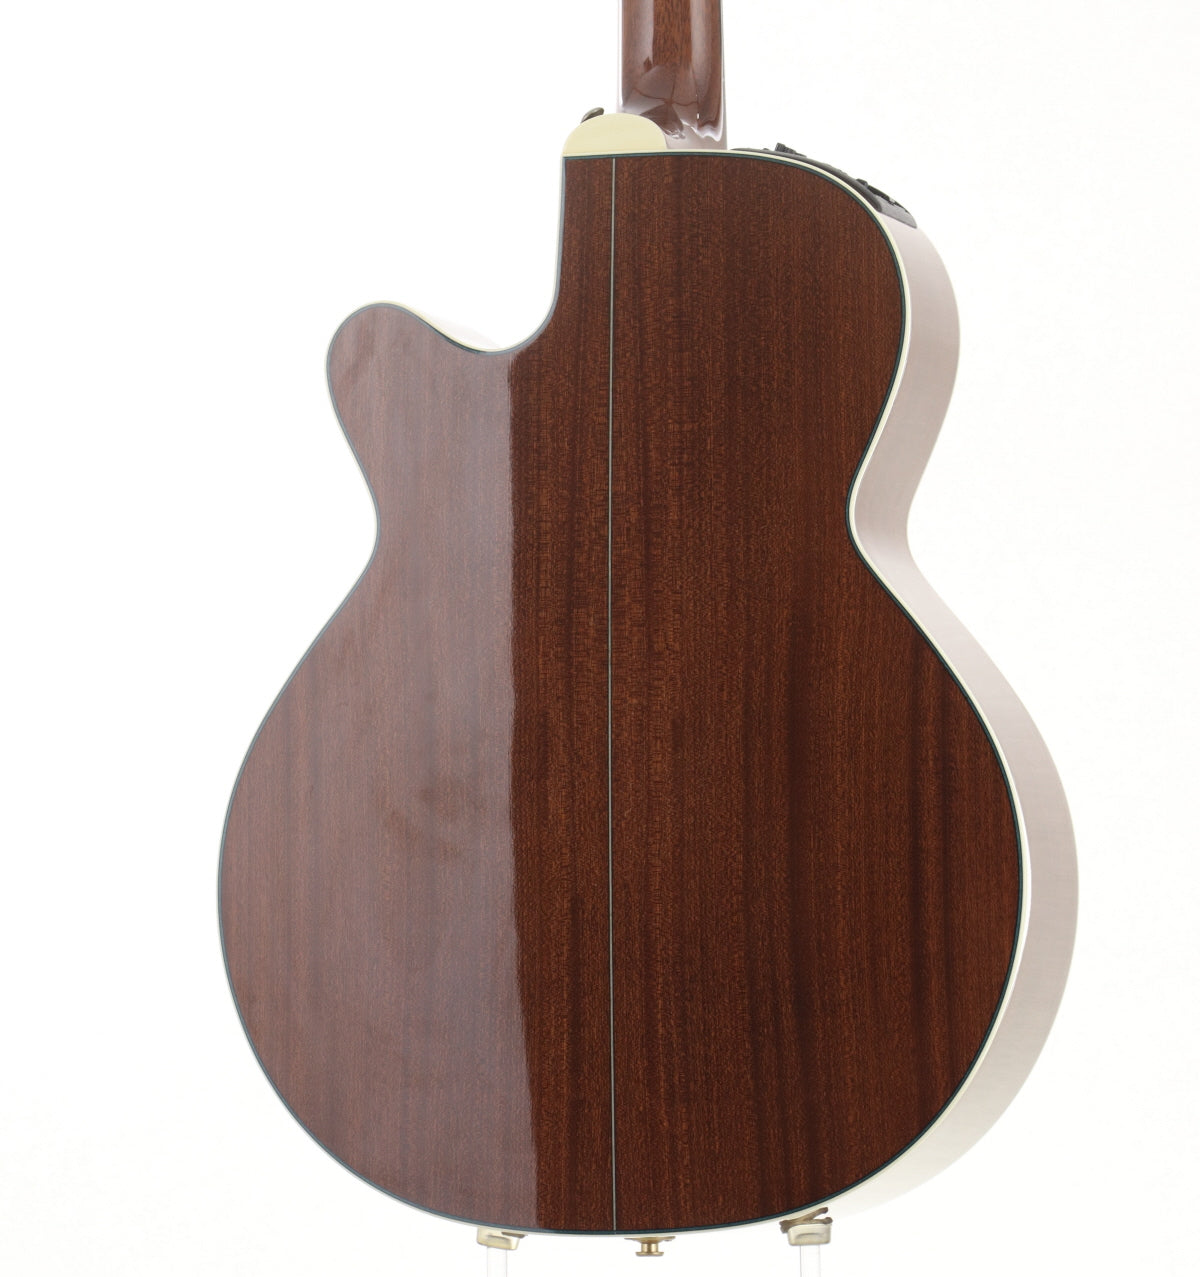 [SN 50020142] USED Takamine / DSF46C Natural [03]